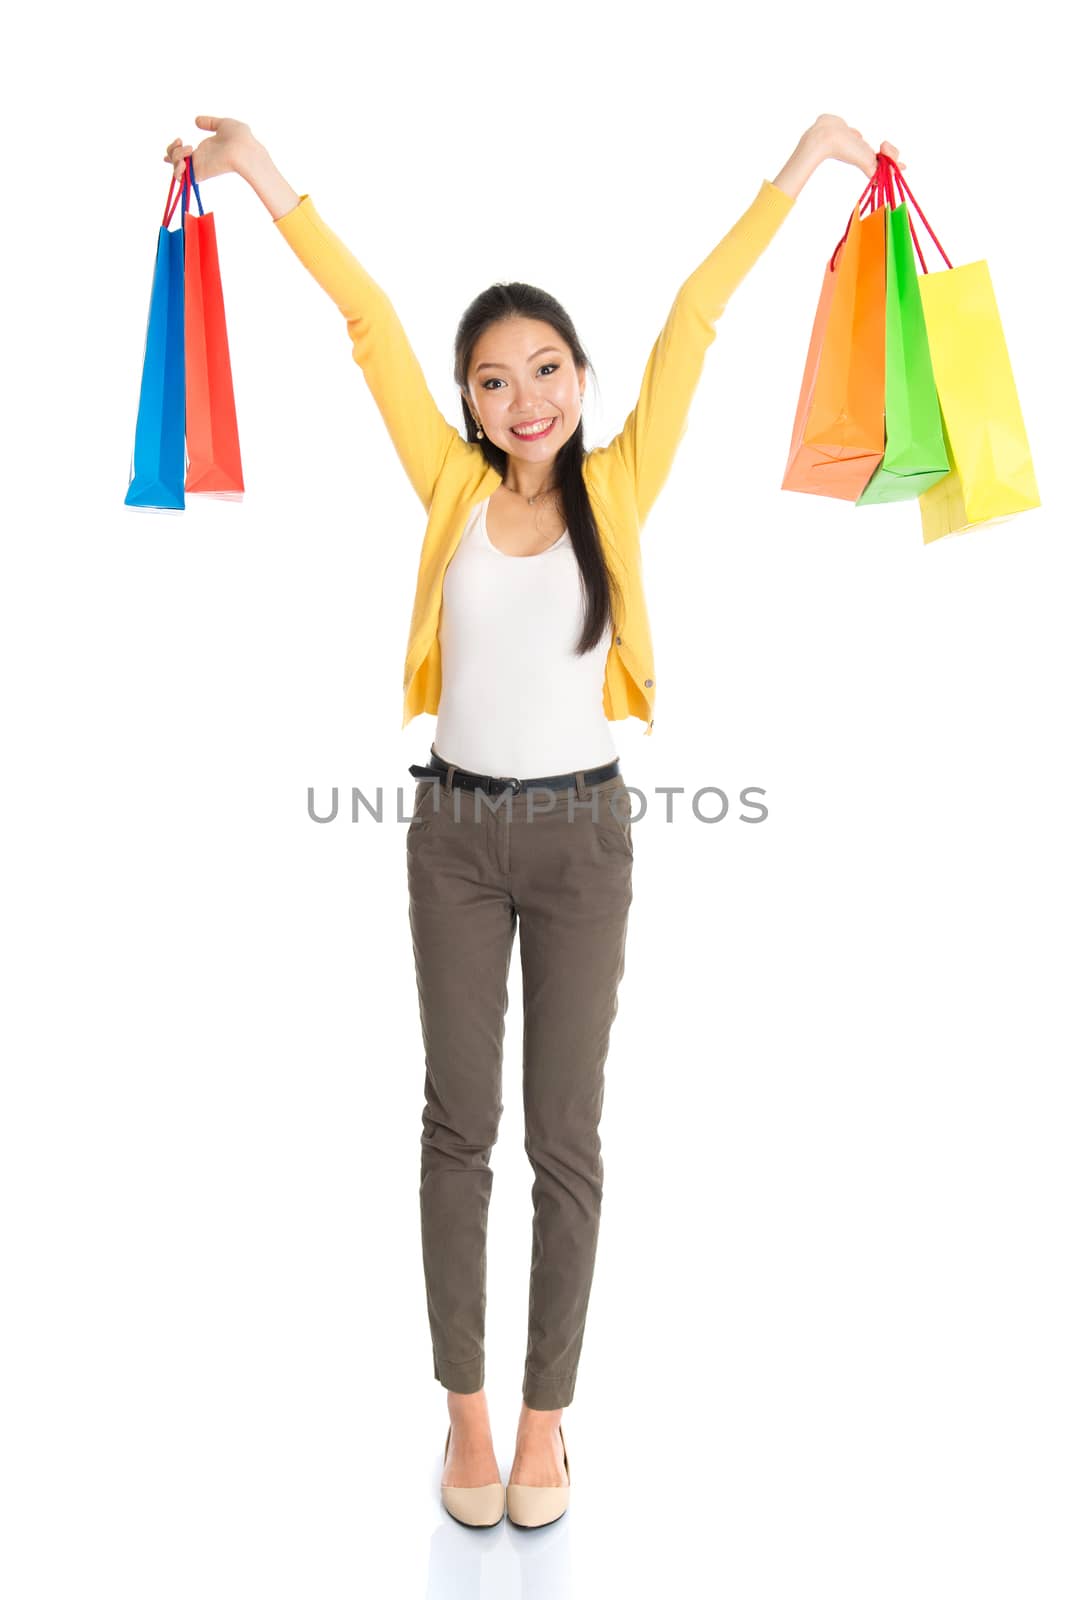 Happy young Asian woman shopper, hands outstretched holding shopping bags and smiling, full length isolated standing on white background.